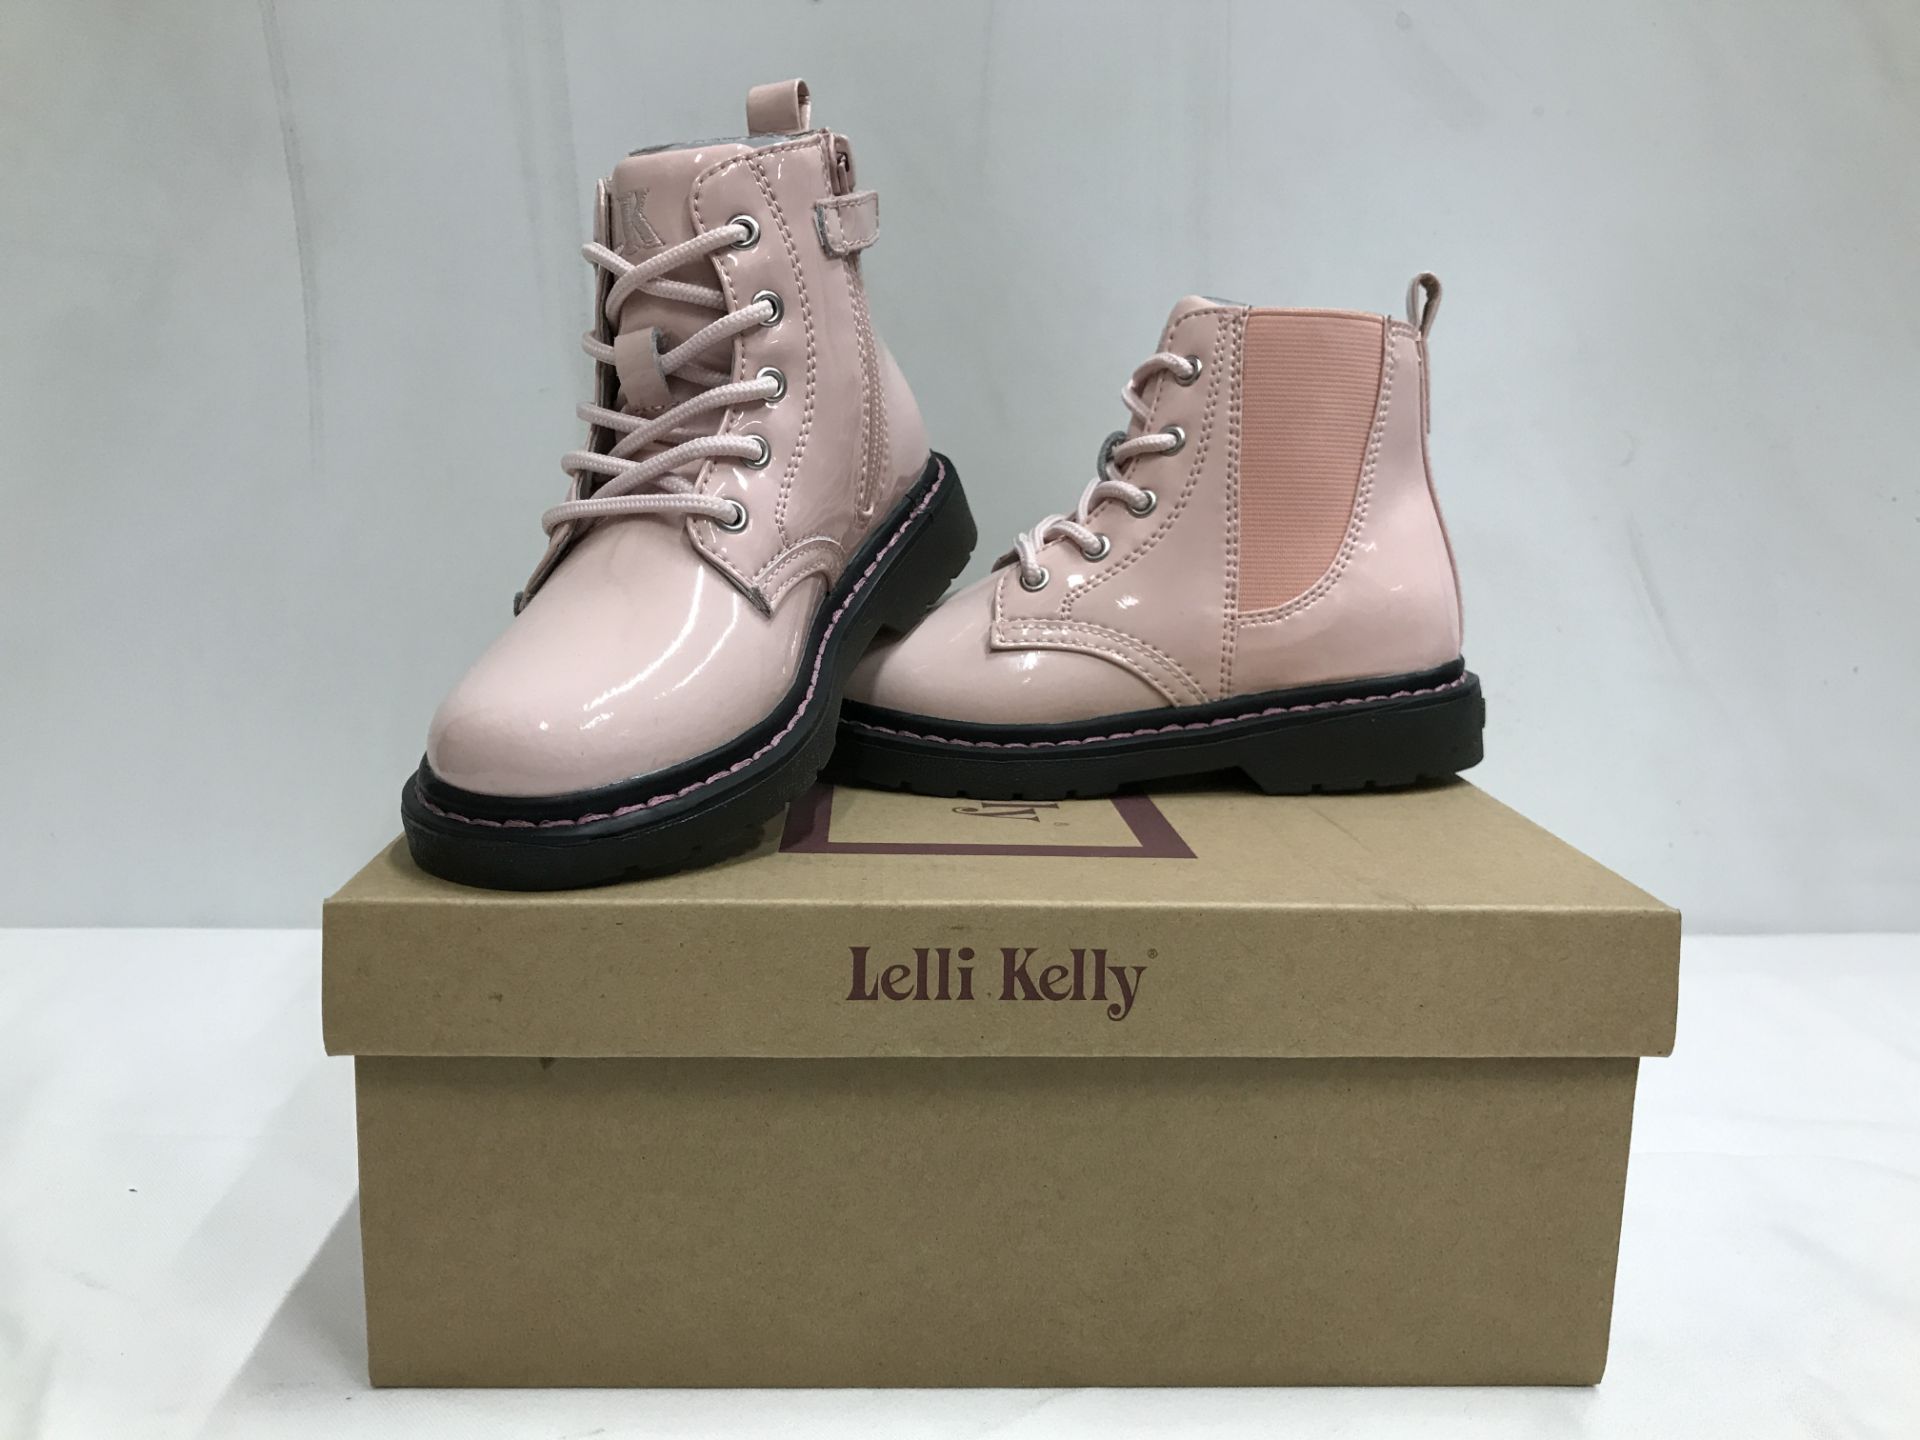 17 x Pairs of Lelli Kelly Children's Shoes - Various Designs - Size UK12 - Image 6 of 9